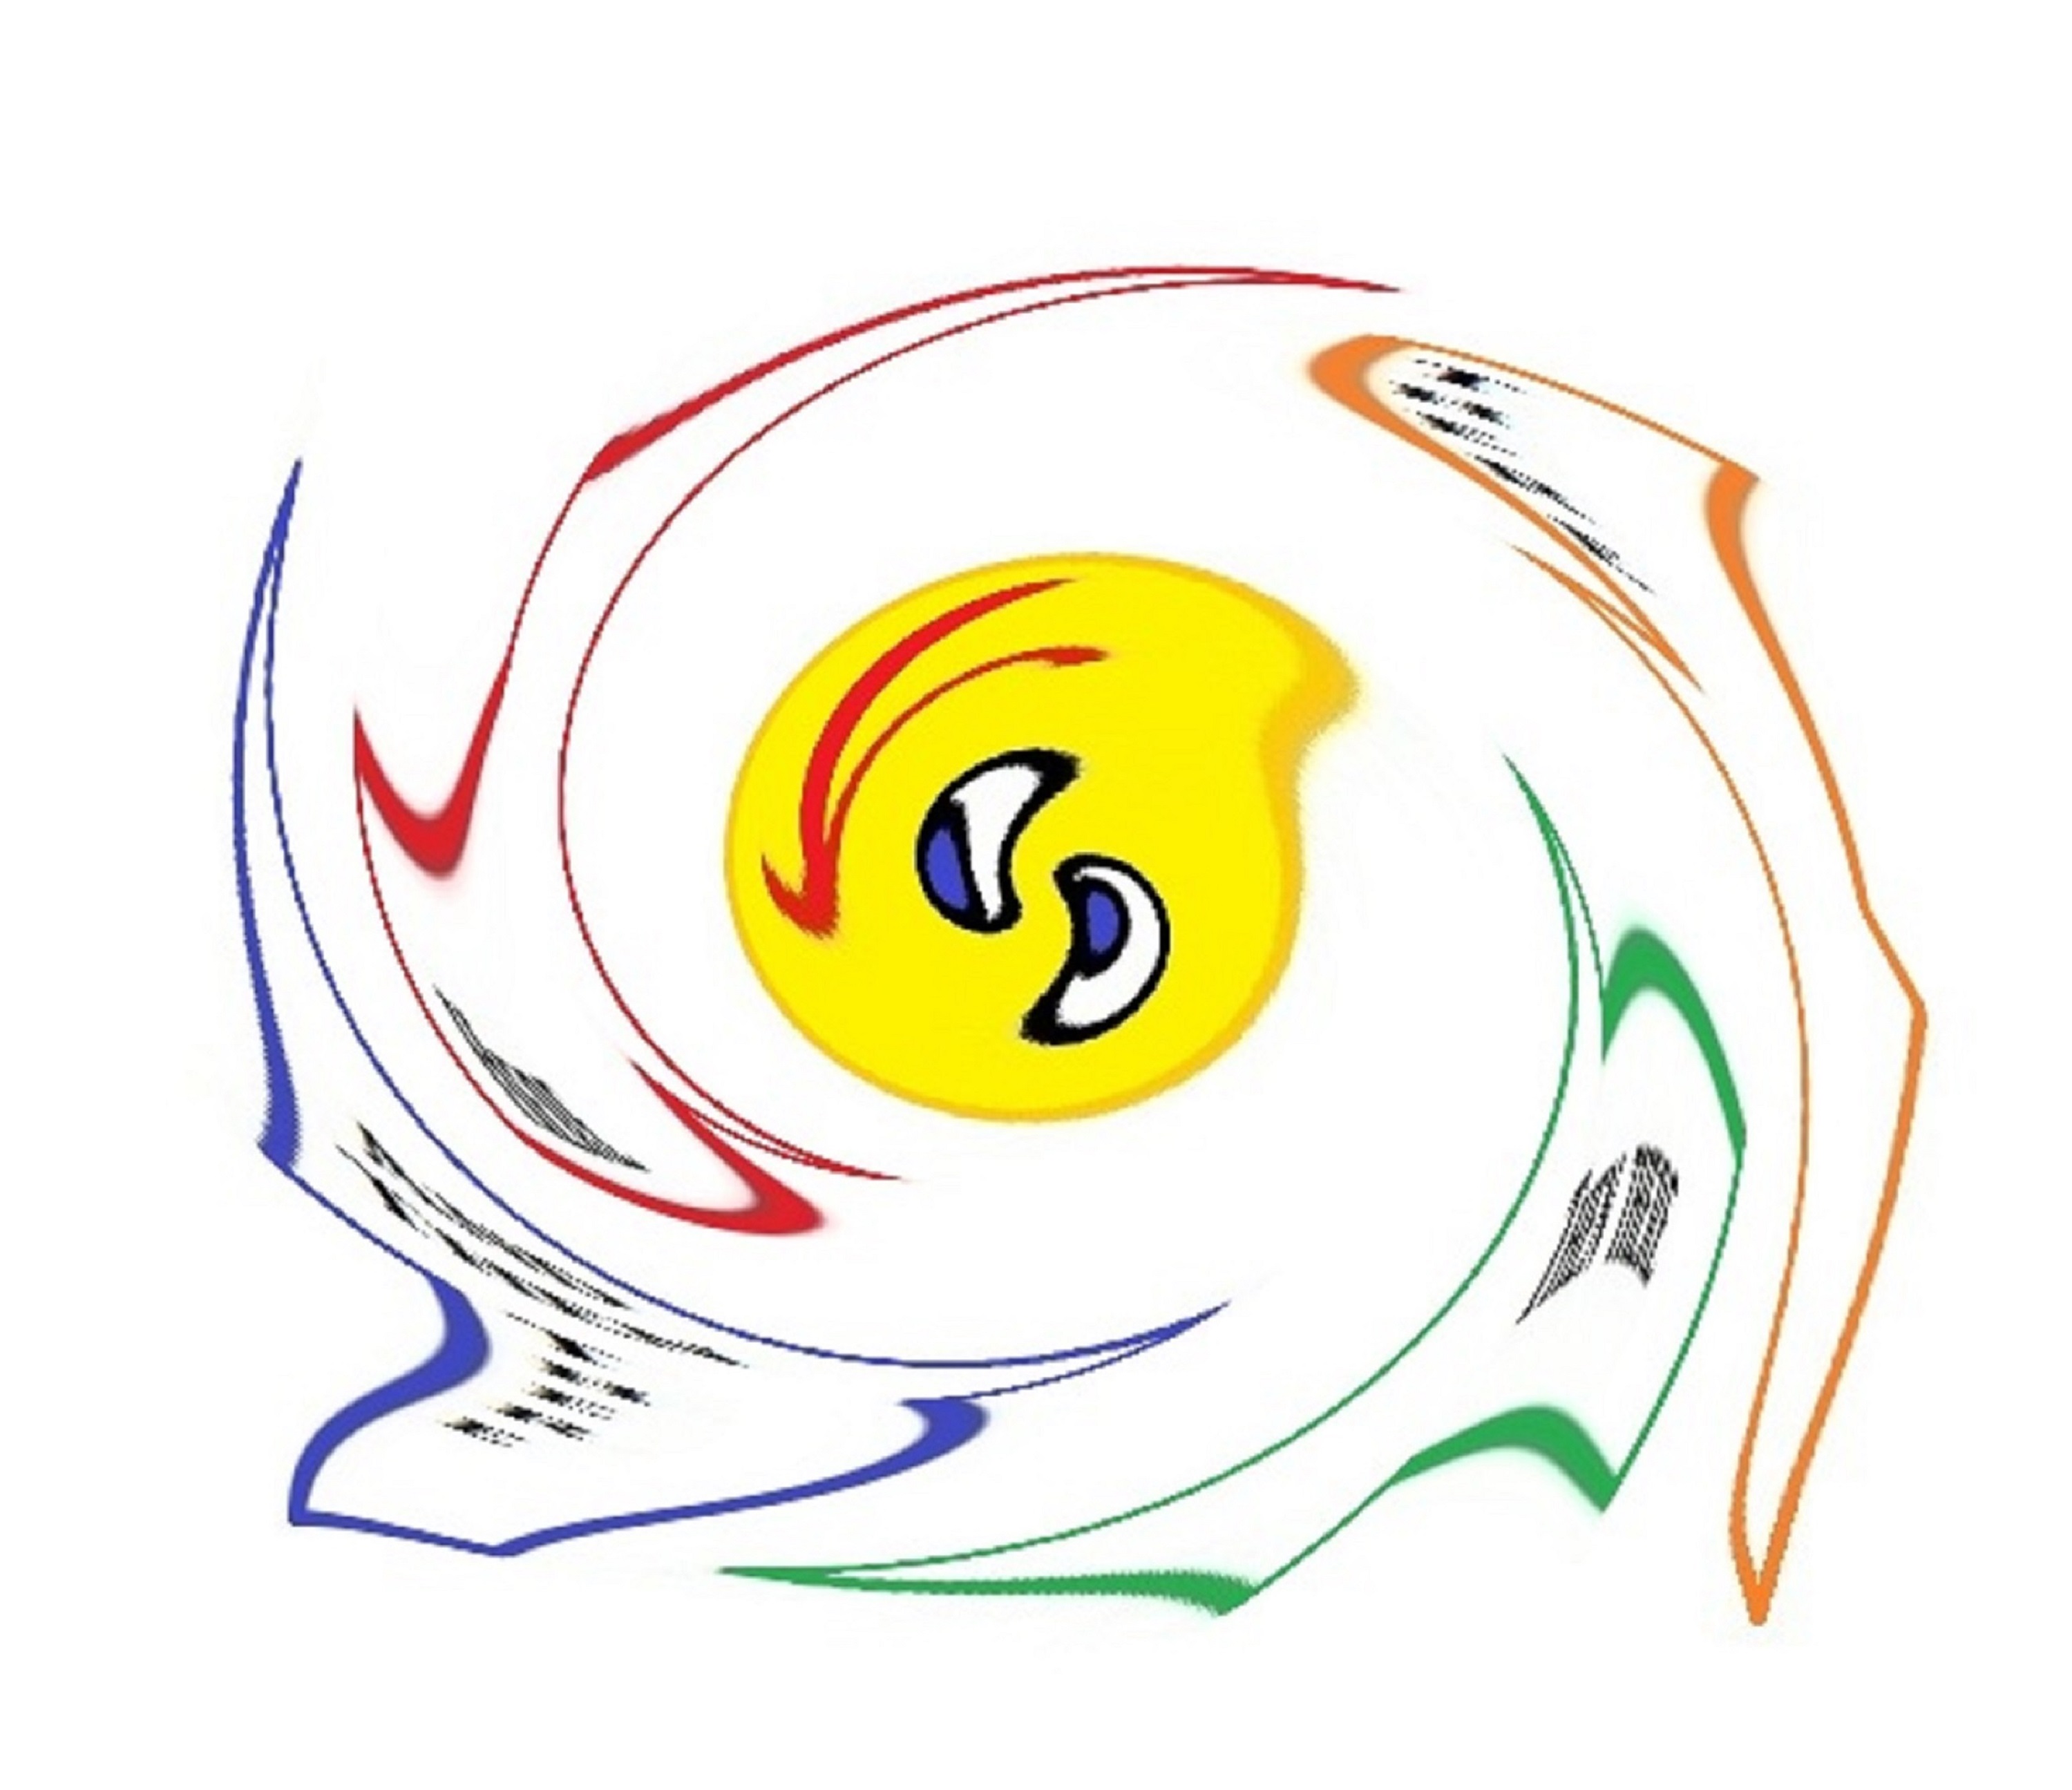 Created by me on Microsoft Paint with "Swirl" effect on LunaPic.com